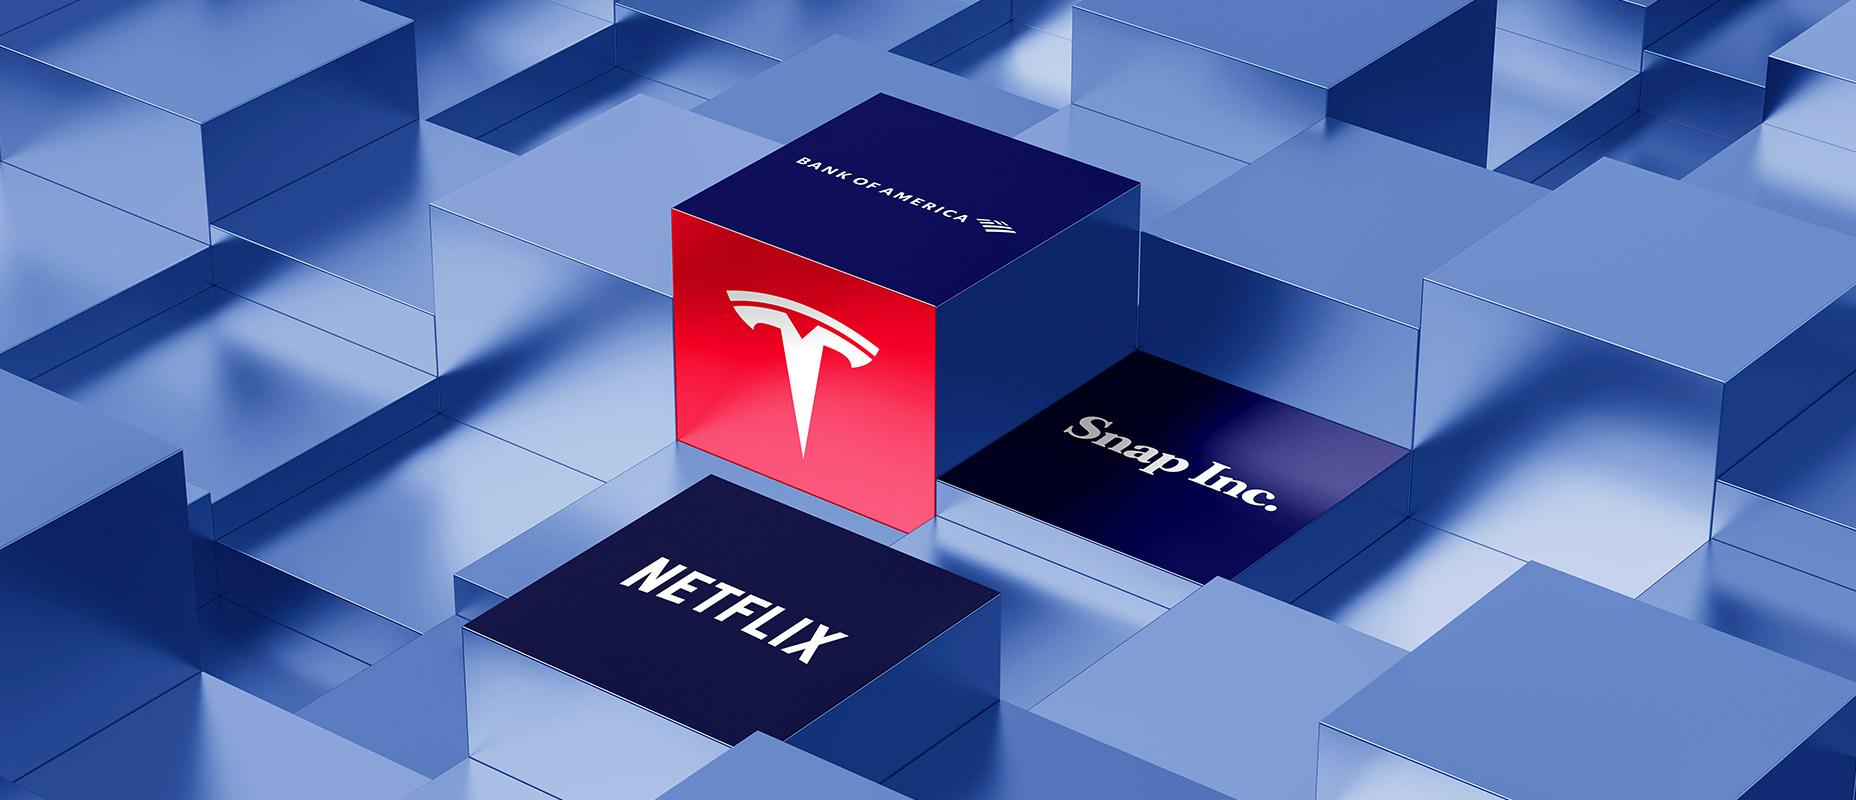 Tesla, Netflix, Snap and Bank of America - the week's highlights (17.10-21.10)